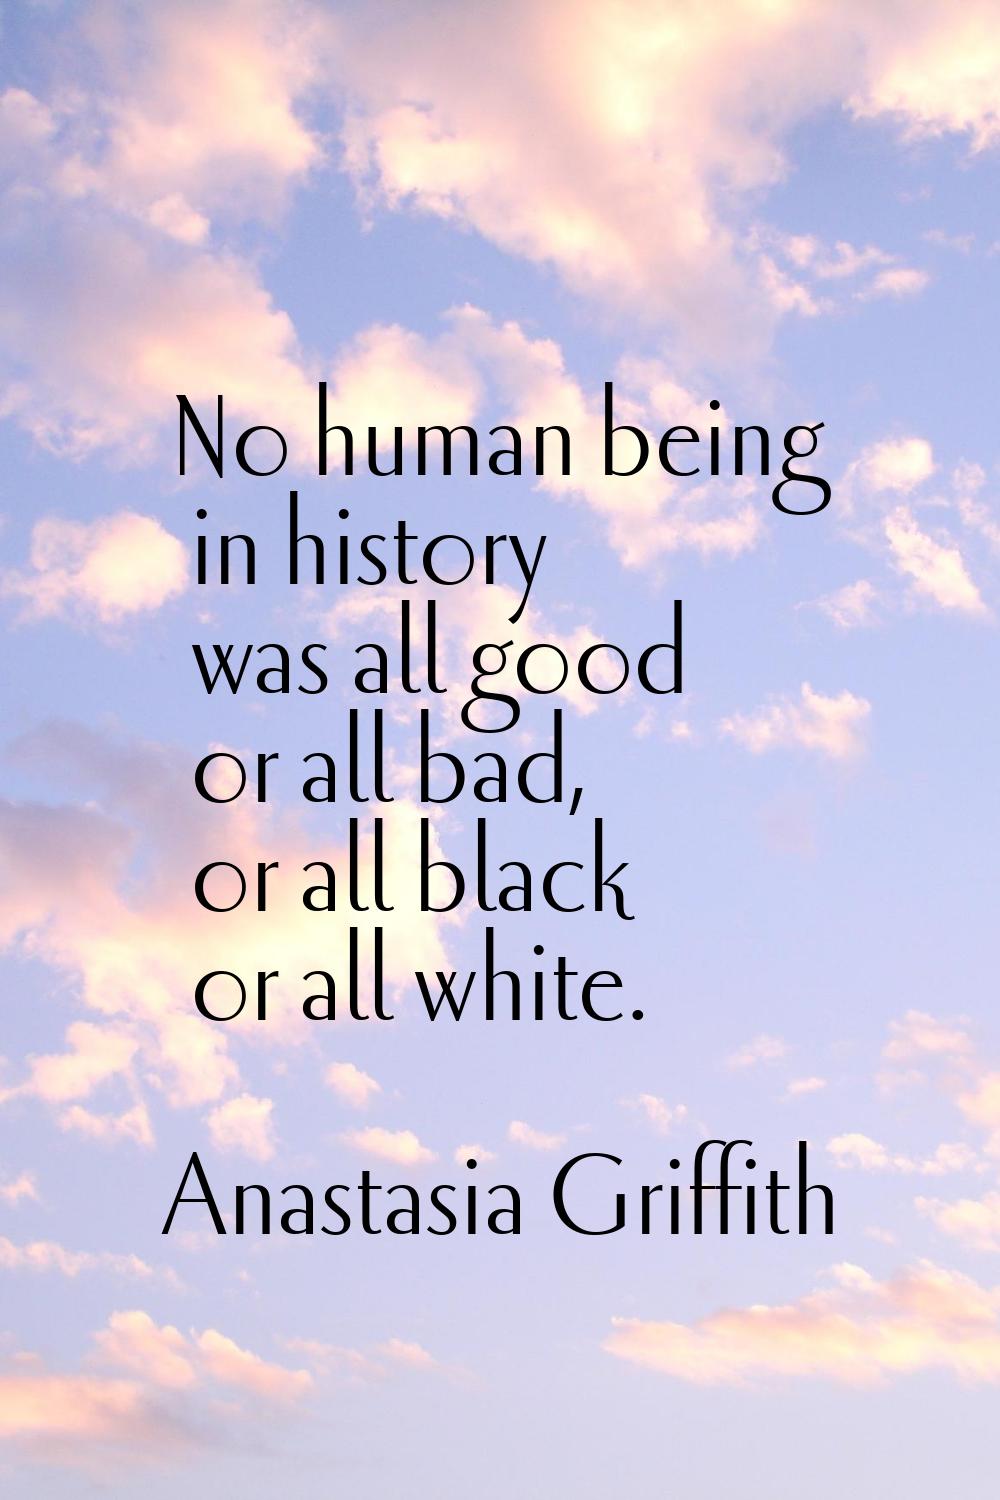 No human being in history was all good or all bad, or all black or all white.